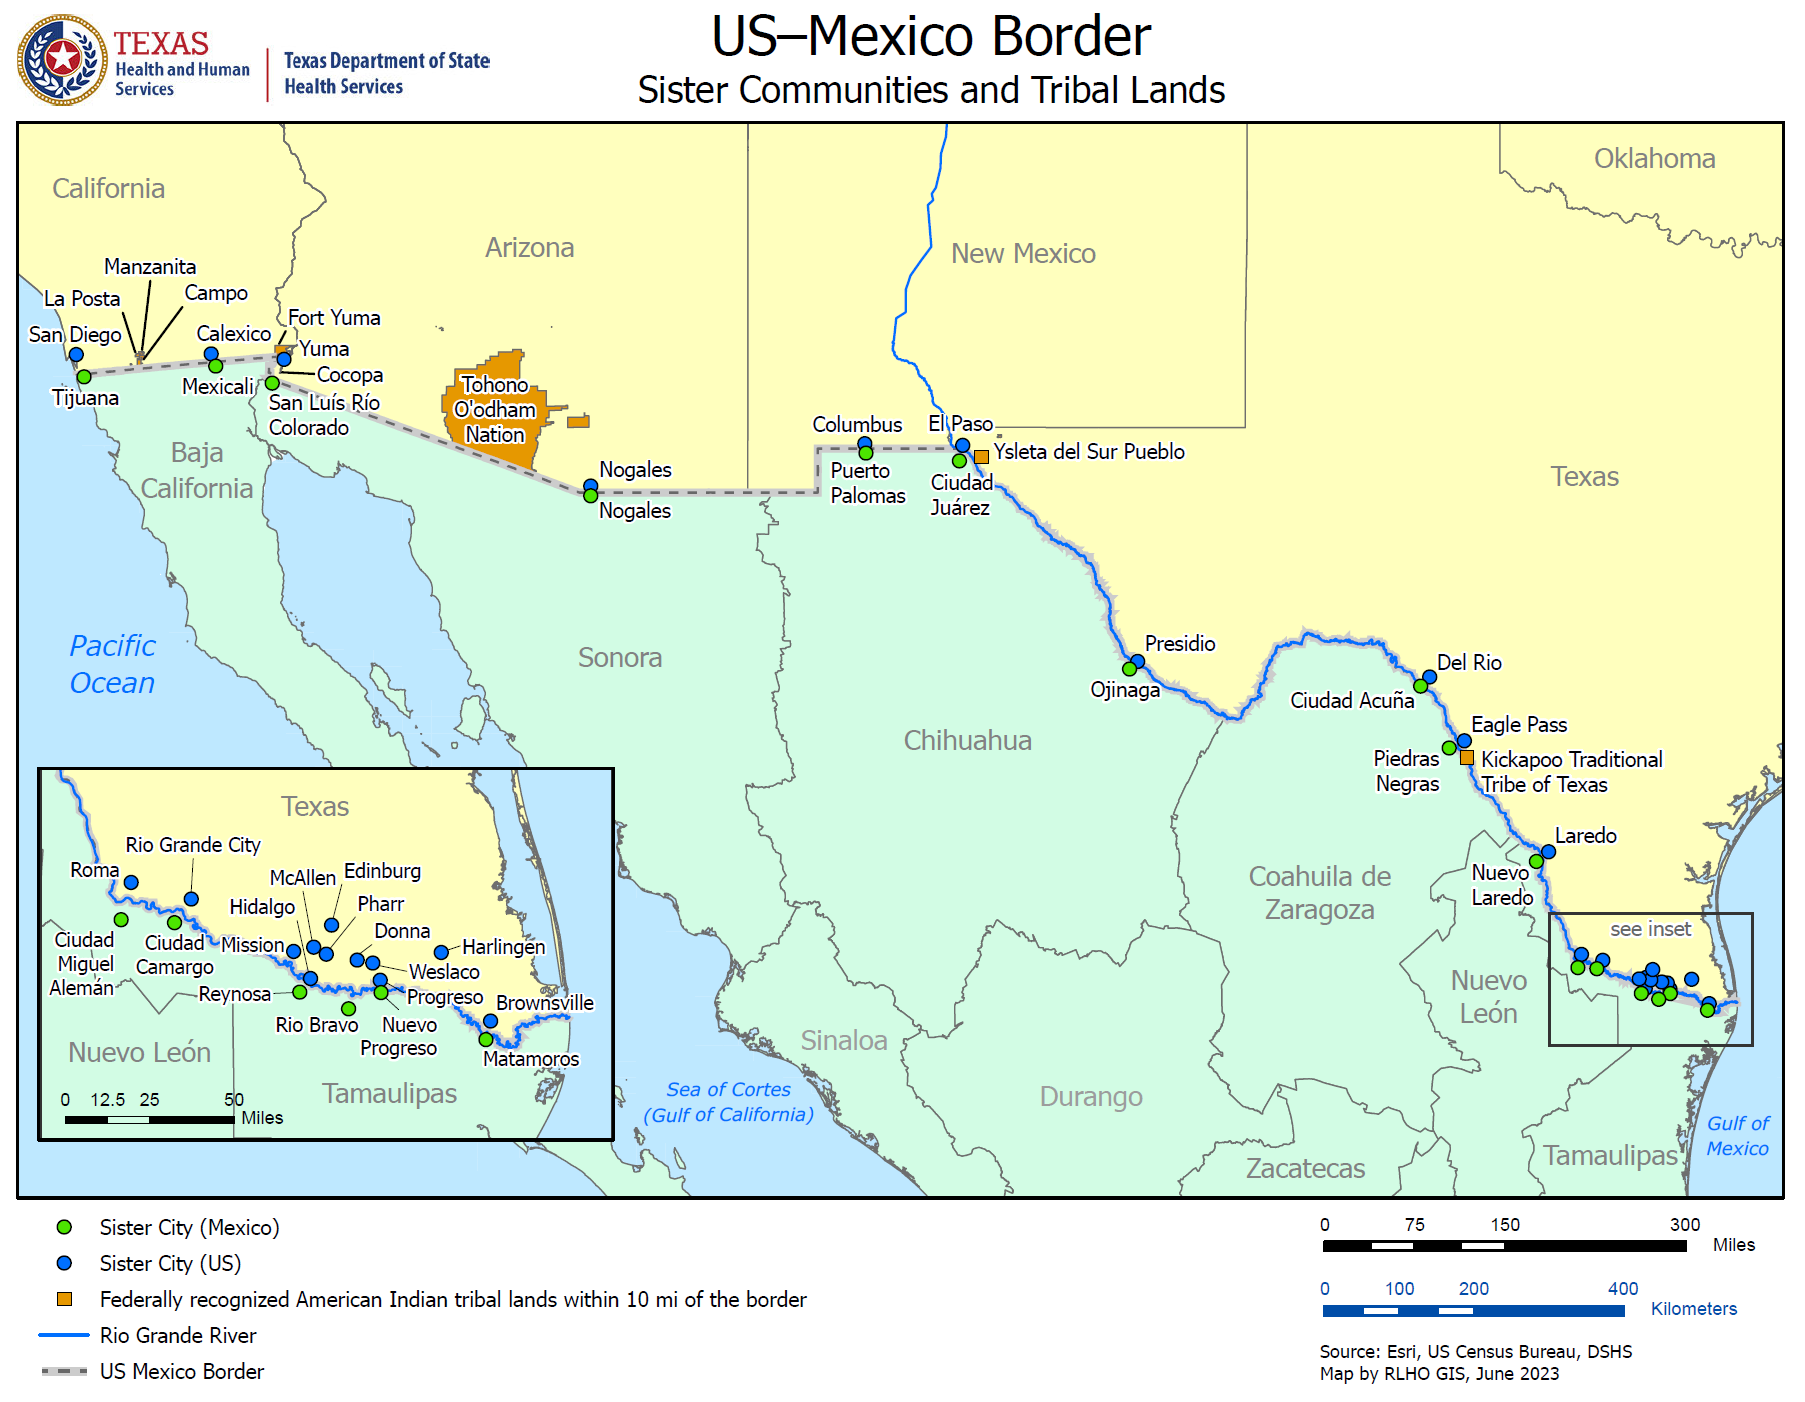 "US Mexico Border Sister Communities and Tribal Lands"